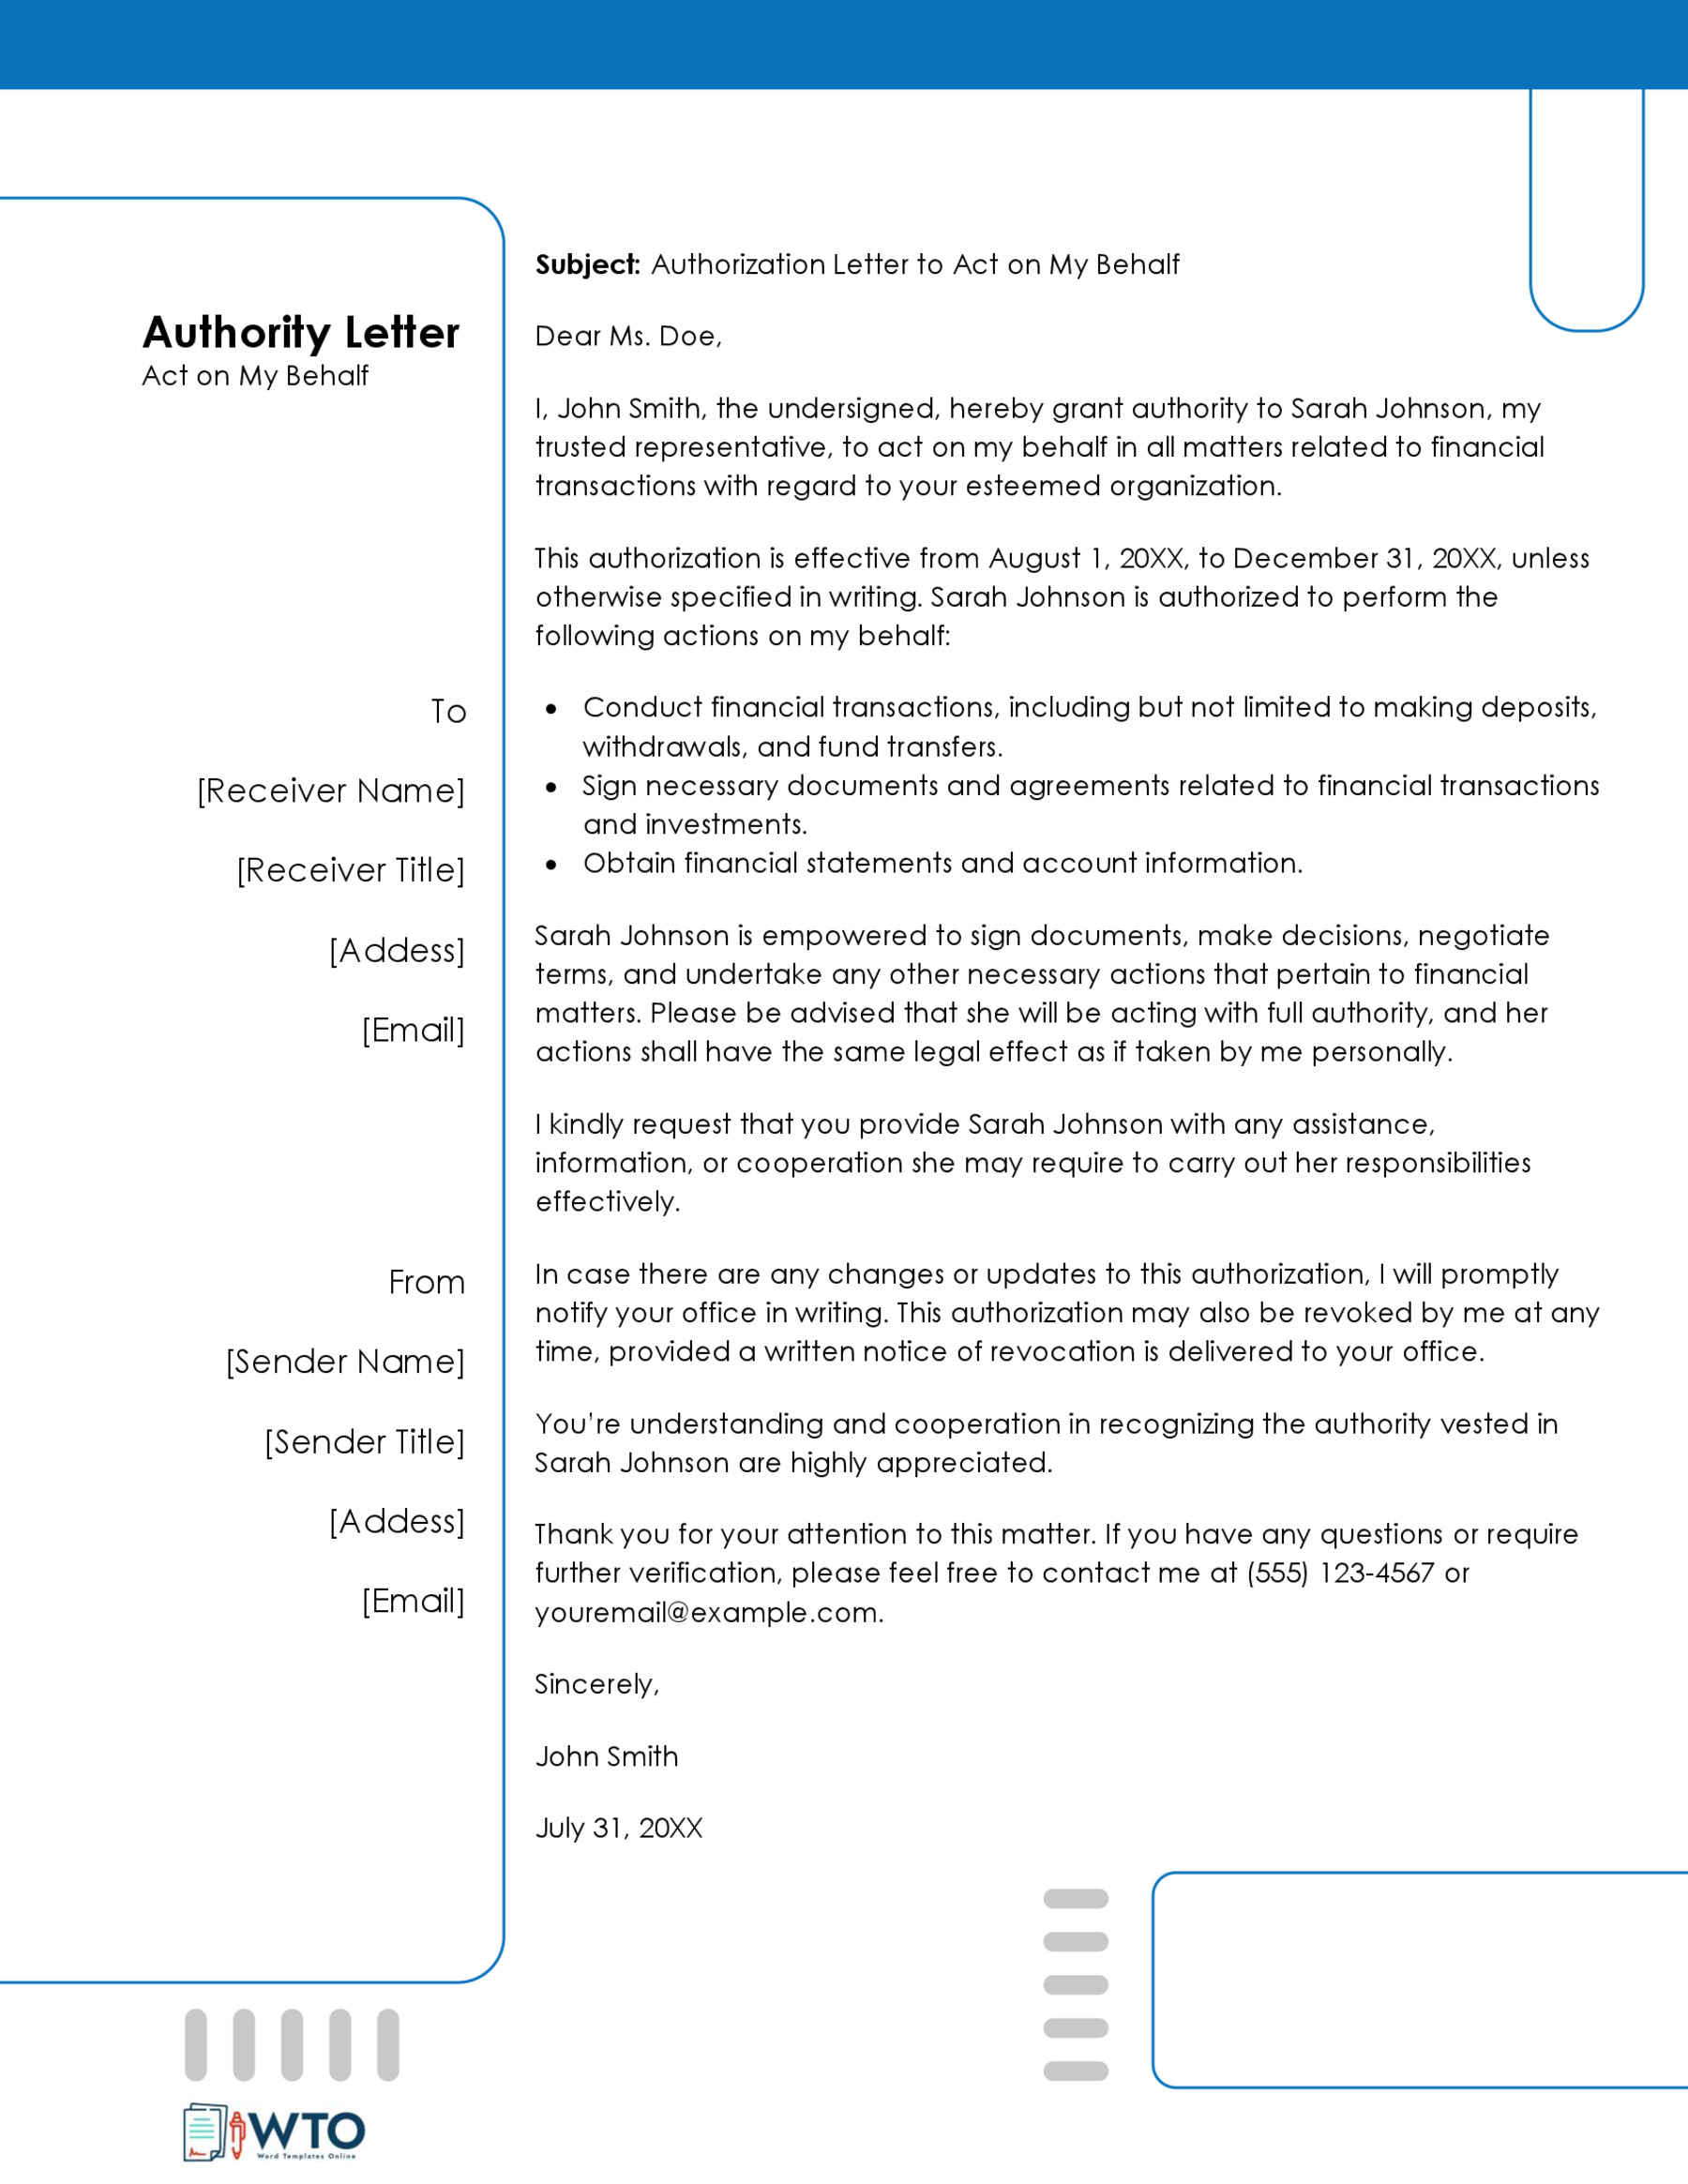 Free Downloadable Act on Behalf Authorization Letter Sample 04 for Word Document